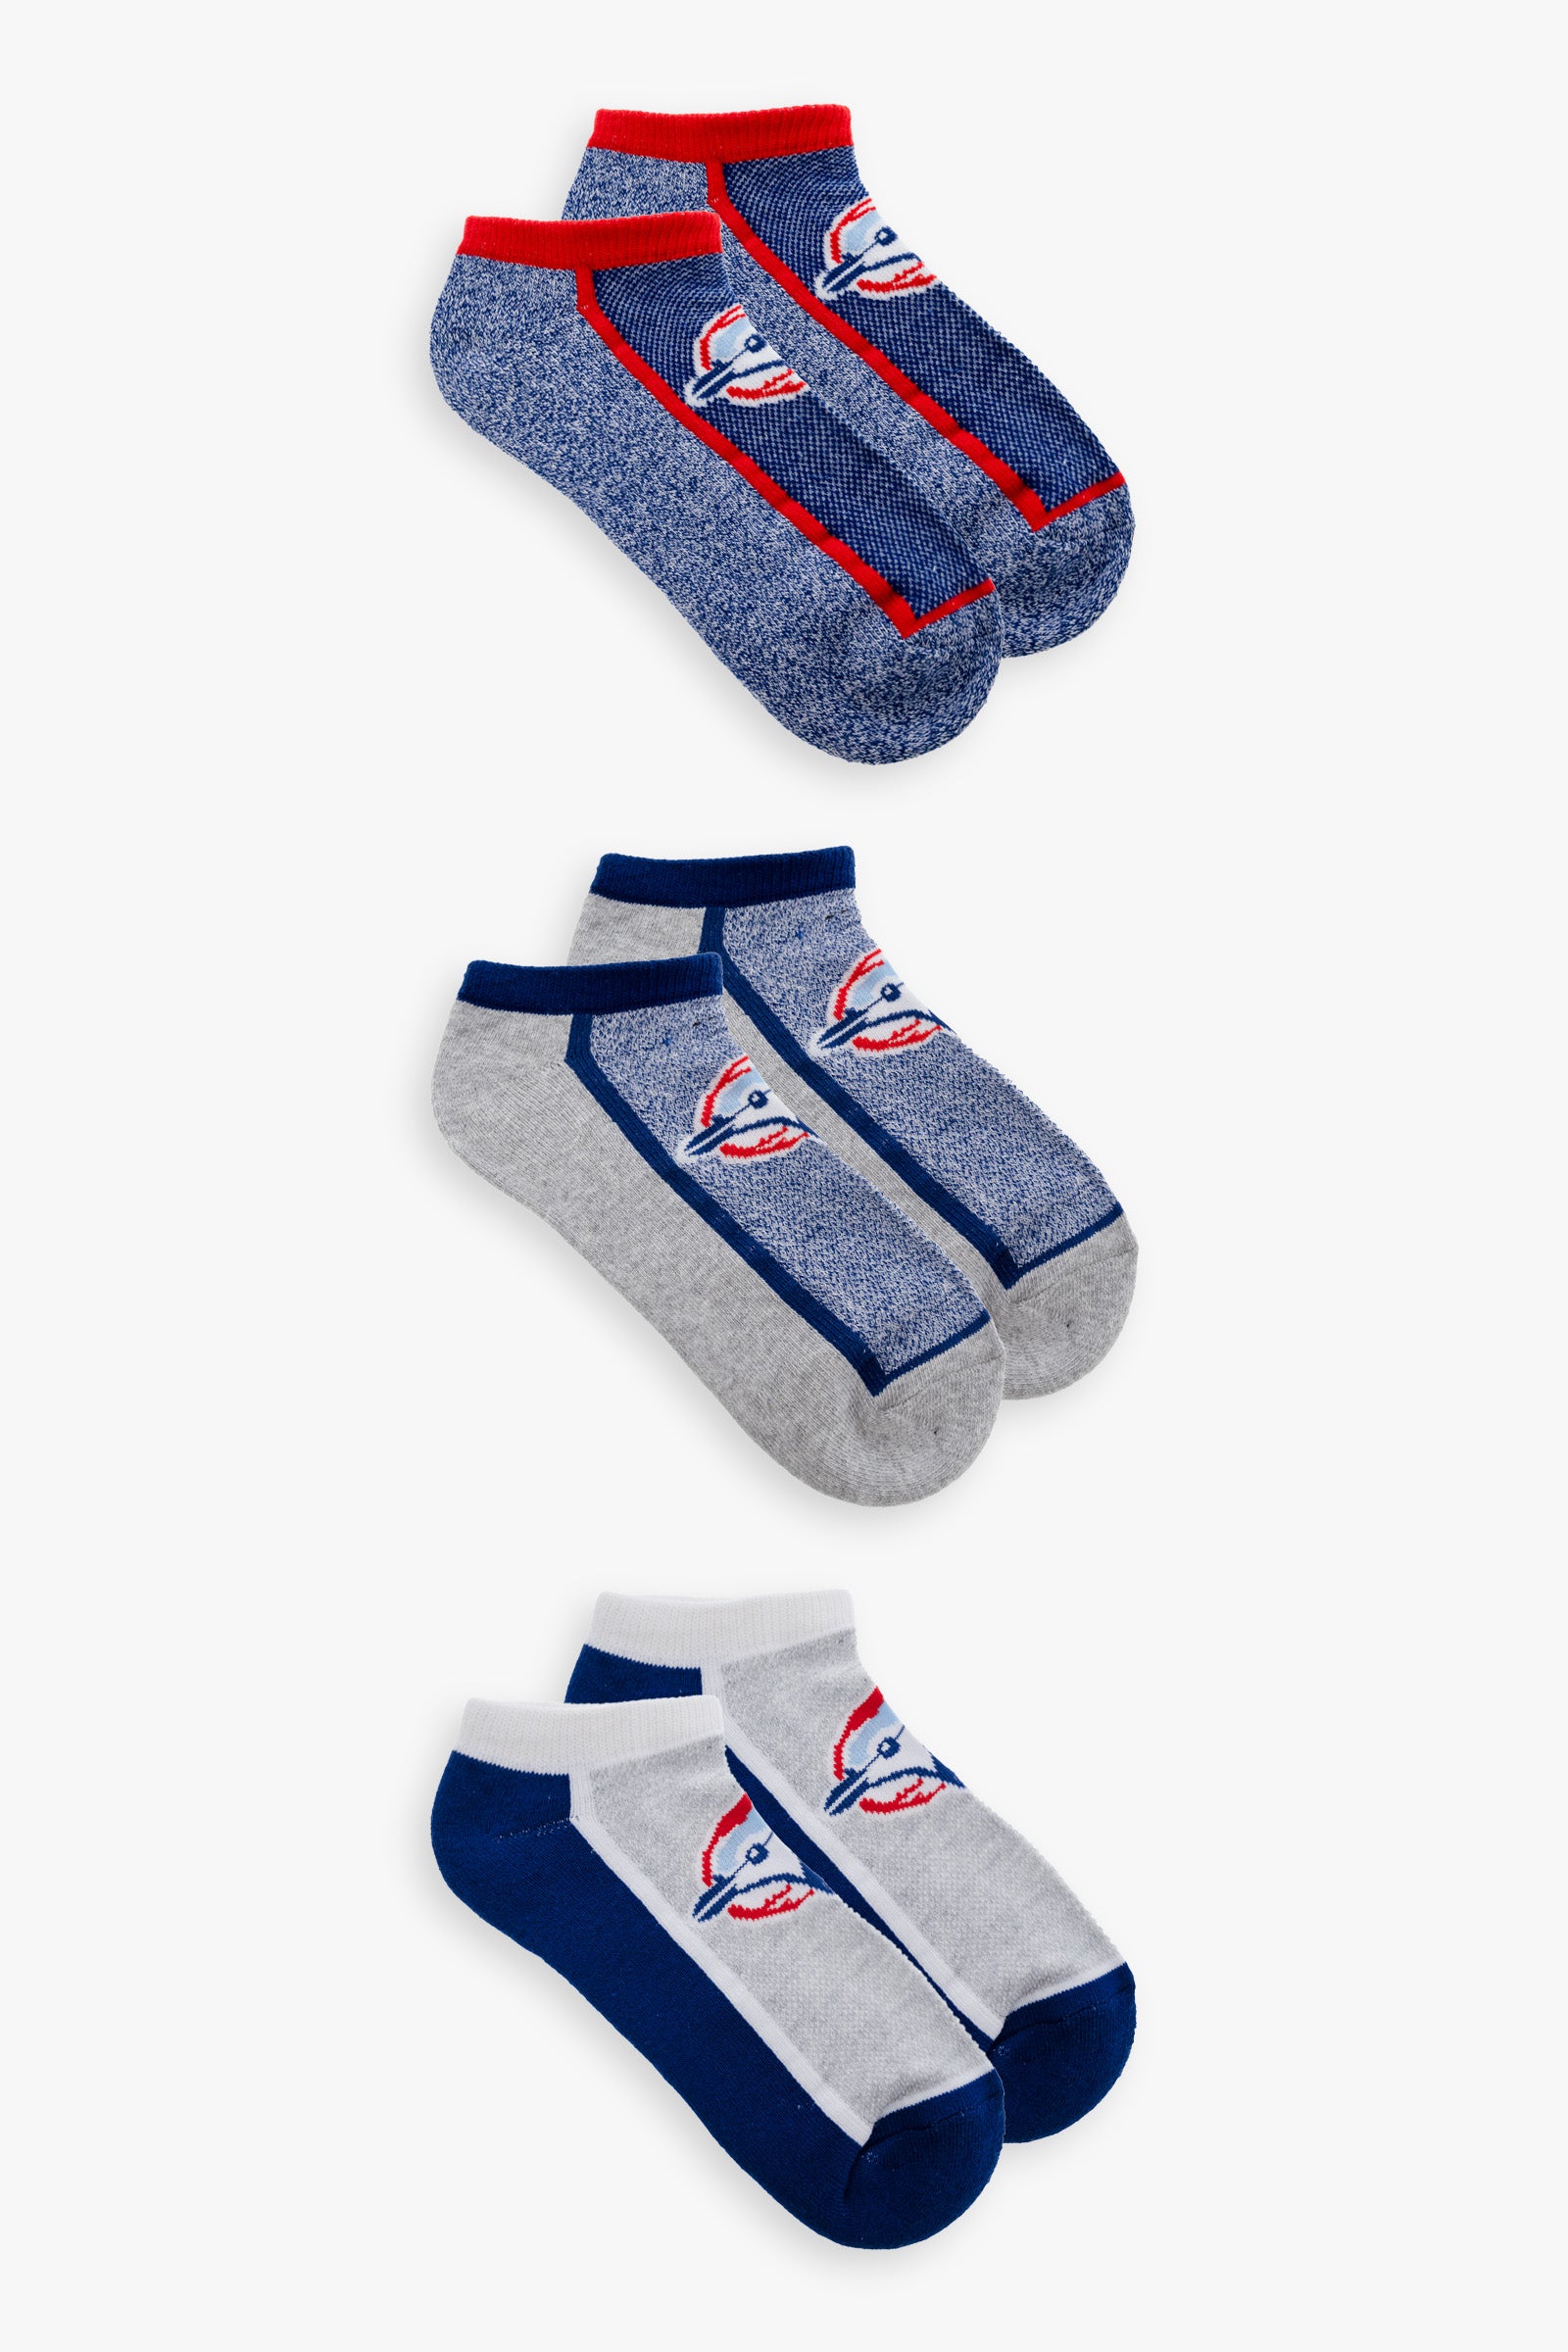 MLB Toronto Blue Jays Men's 3-Pack Cooperstown Collection No Show Ankle Socks